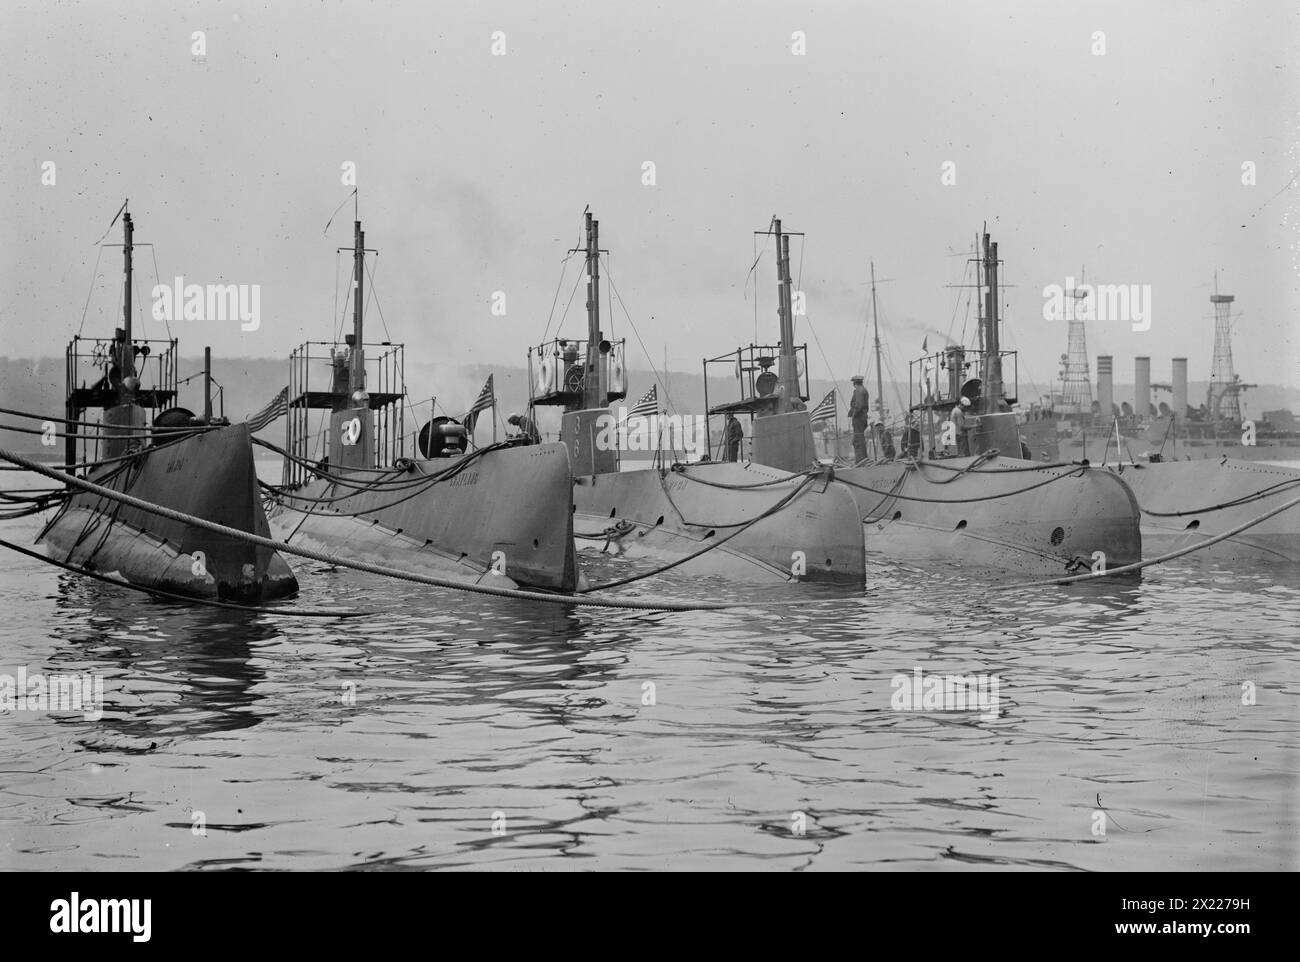 SALEM, GRAYLING, TARPON, OCTOPUS, BONITA, and NEBRASKA, 1911. Shows USS submarines participating in the 1911 naval review in New York city, with the Nebraska in the background. The name &quot;Salem&quot; is likely a typo for the name &quot;Salmon.&quot; Stock Photo